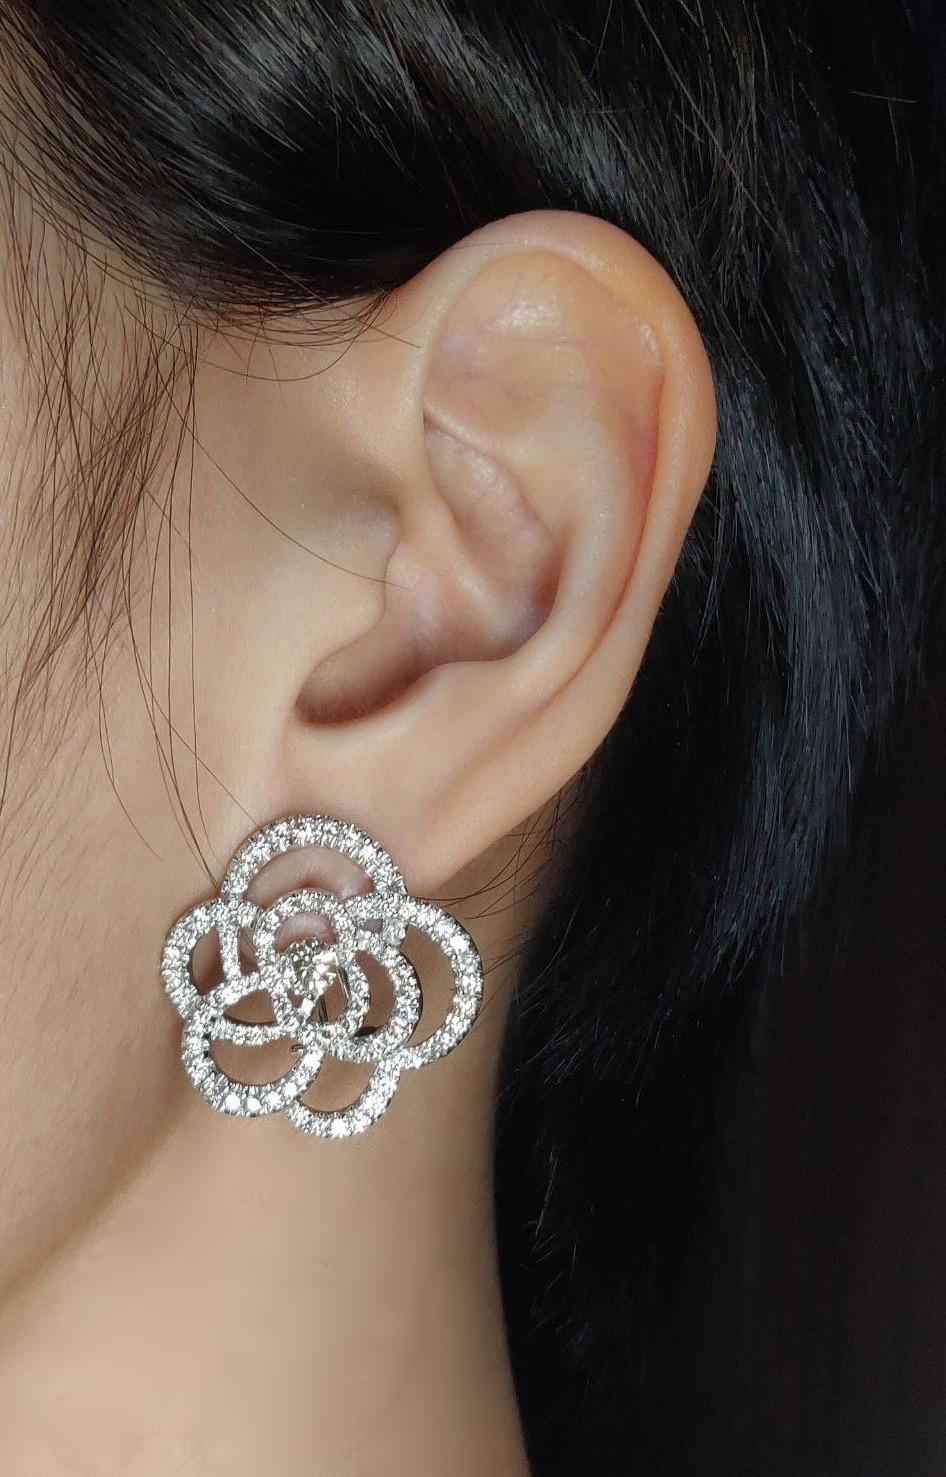 Large Floral Silhouette Diamond Clip-On Earrings in 18 Karat White Gold

Gold: 18K White Gold, 17.622 g
Diamond: 3.44 ct

Dimensions: 28 mm x 27 mm

Also available in small and medium sizes.